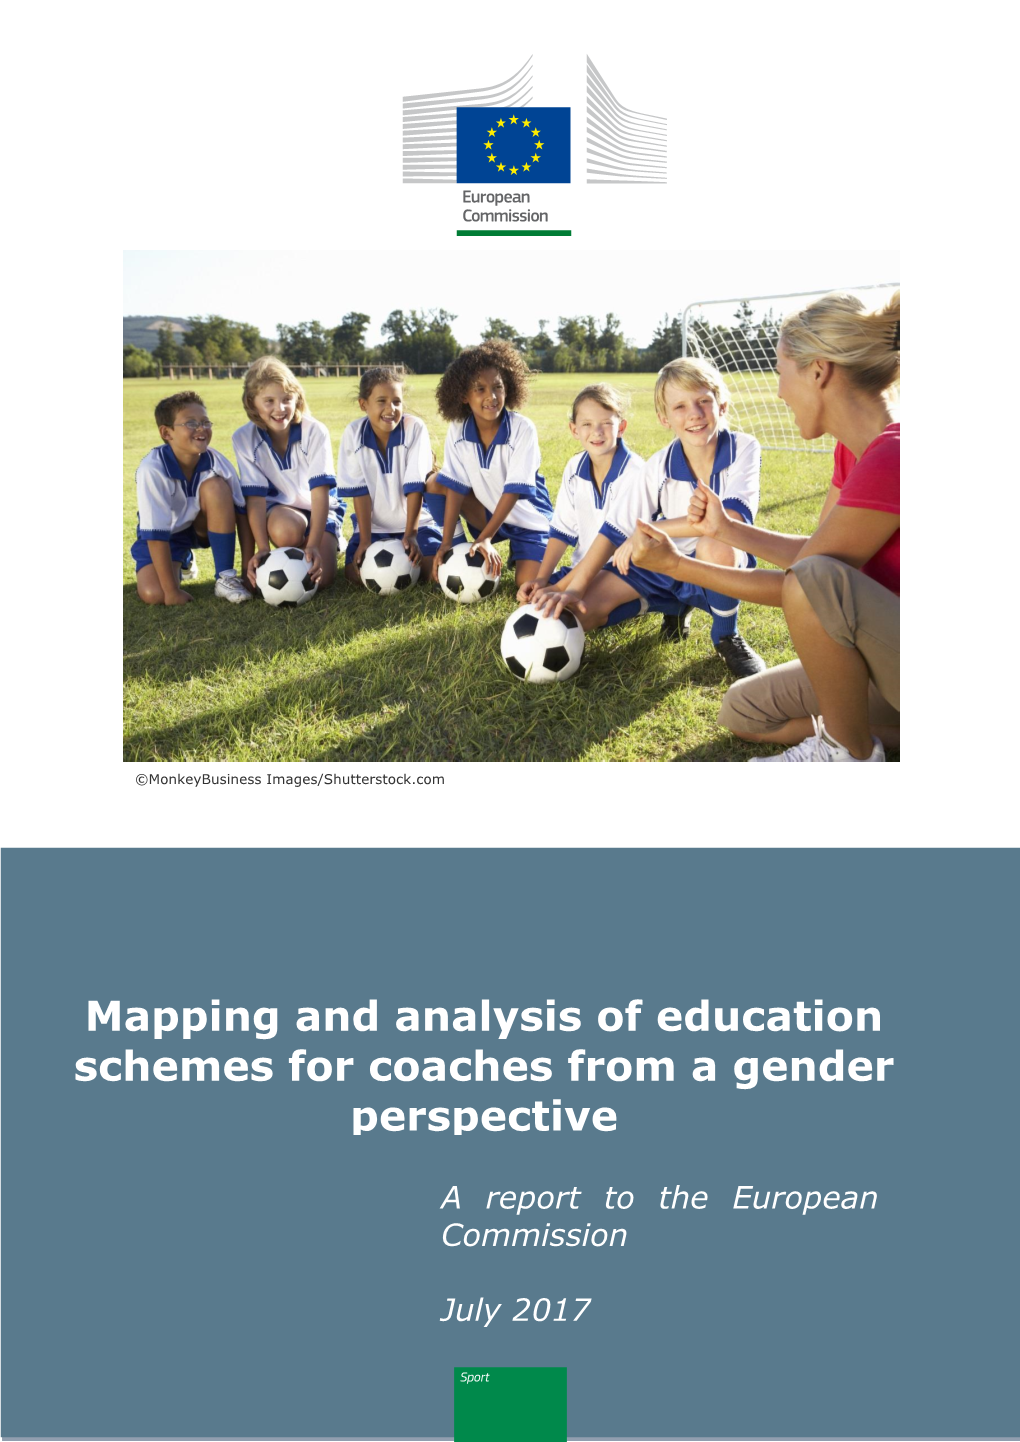 Mapping and Analysis of Education Schemes for Coaches from a Gender Perspective